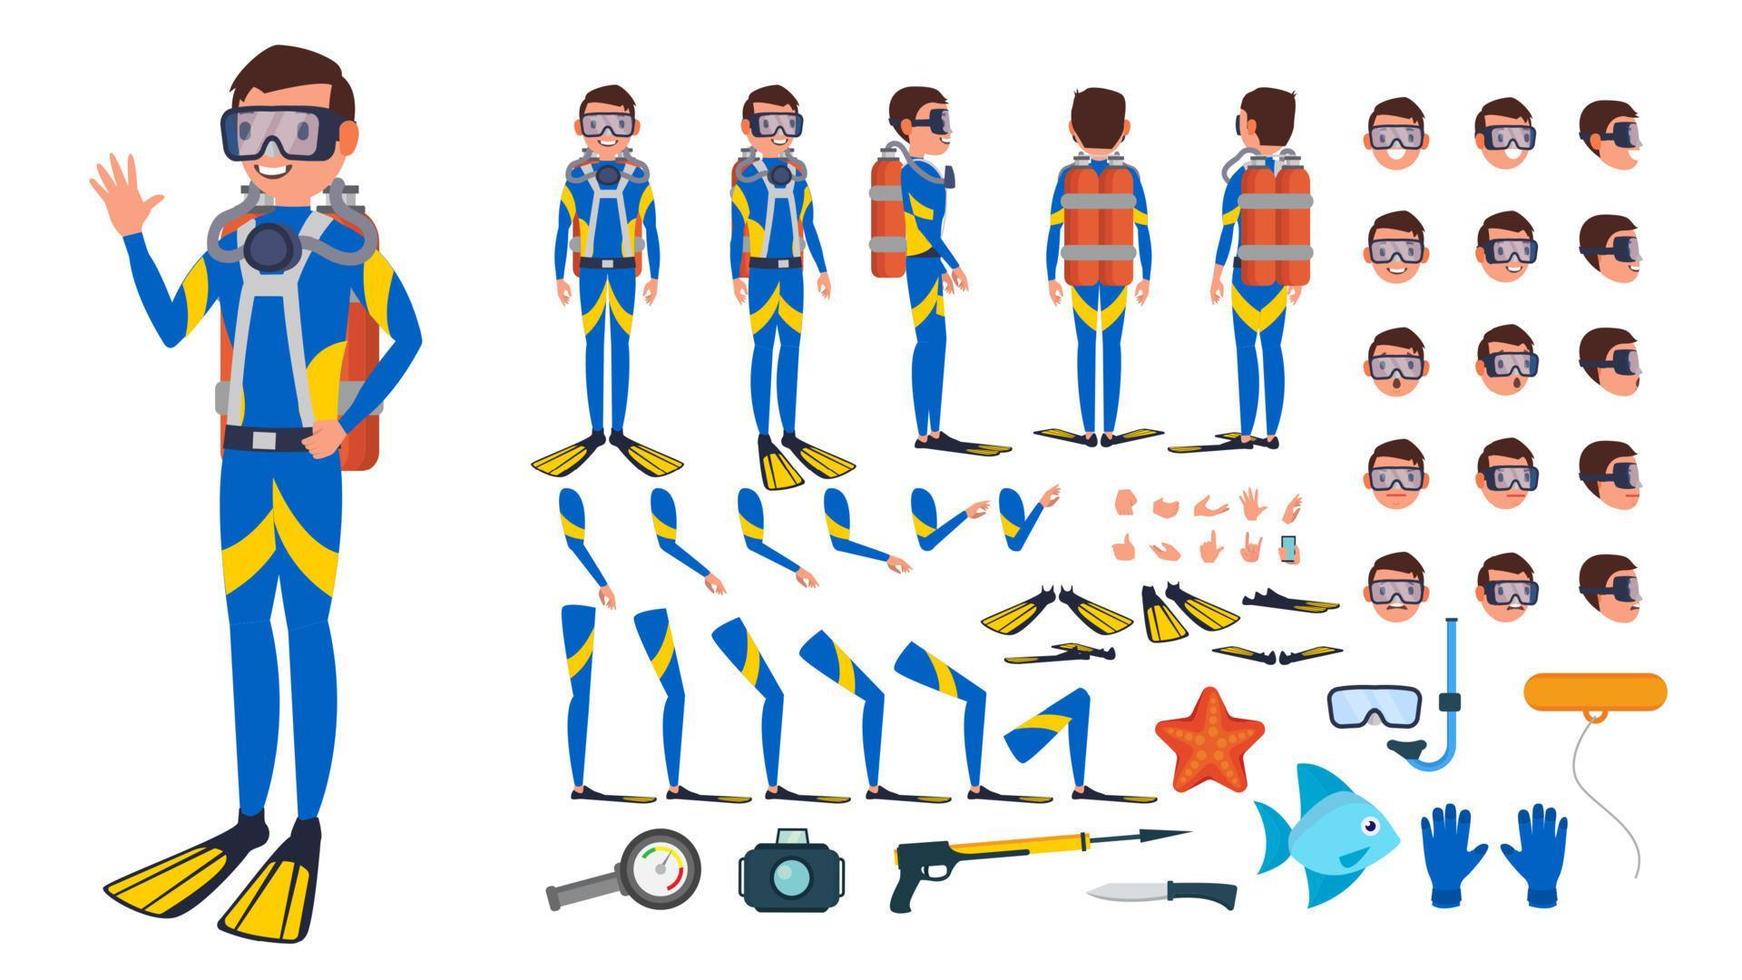 Diver Man Vector. Animated Character Creation Set. Under Water. Scuba Diver. Snorkeling Diving. Full Length, Front, Side, Back View, Poses, Face Emotions, Gestures. Isolated Flat Cartoon Illustration vector